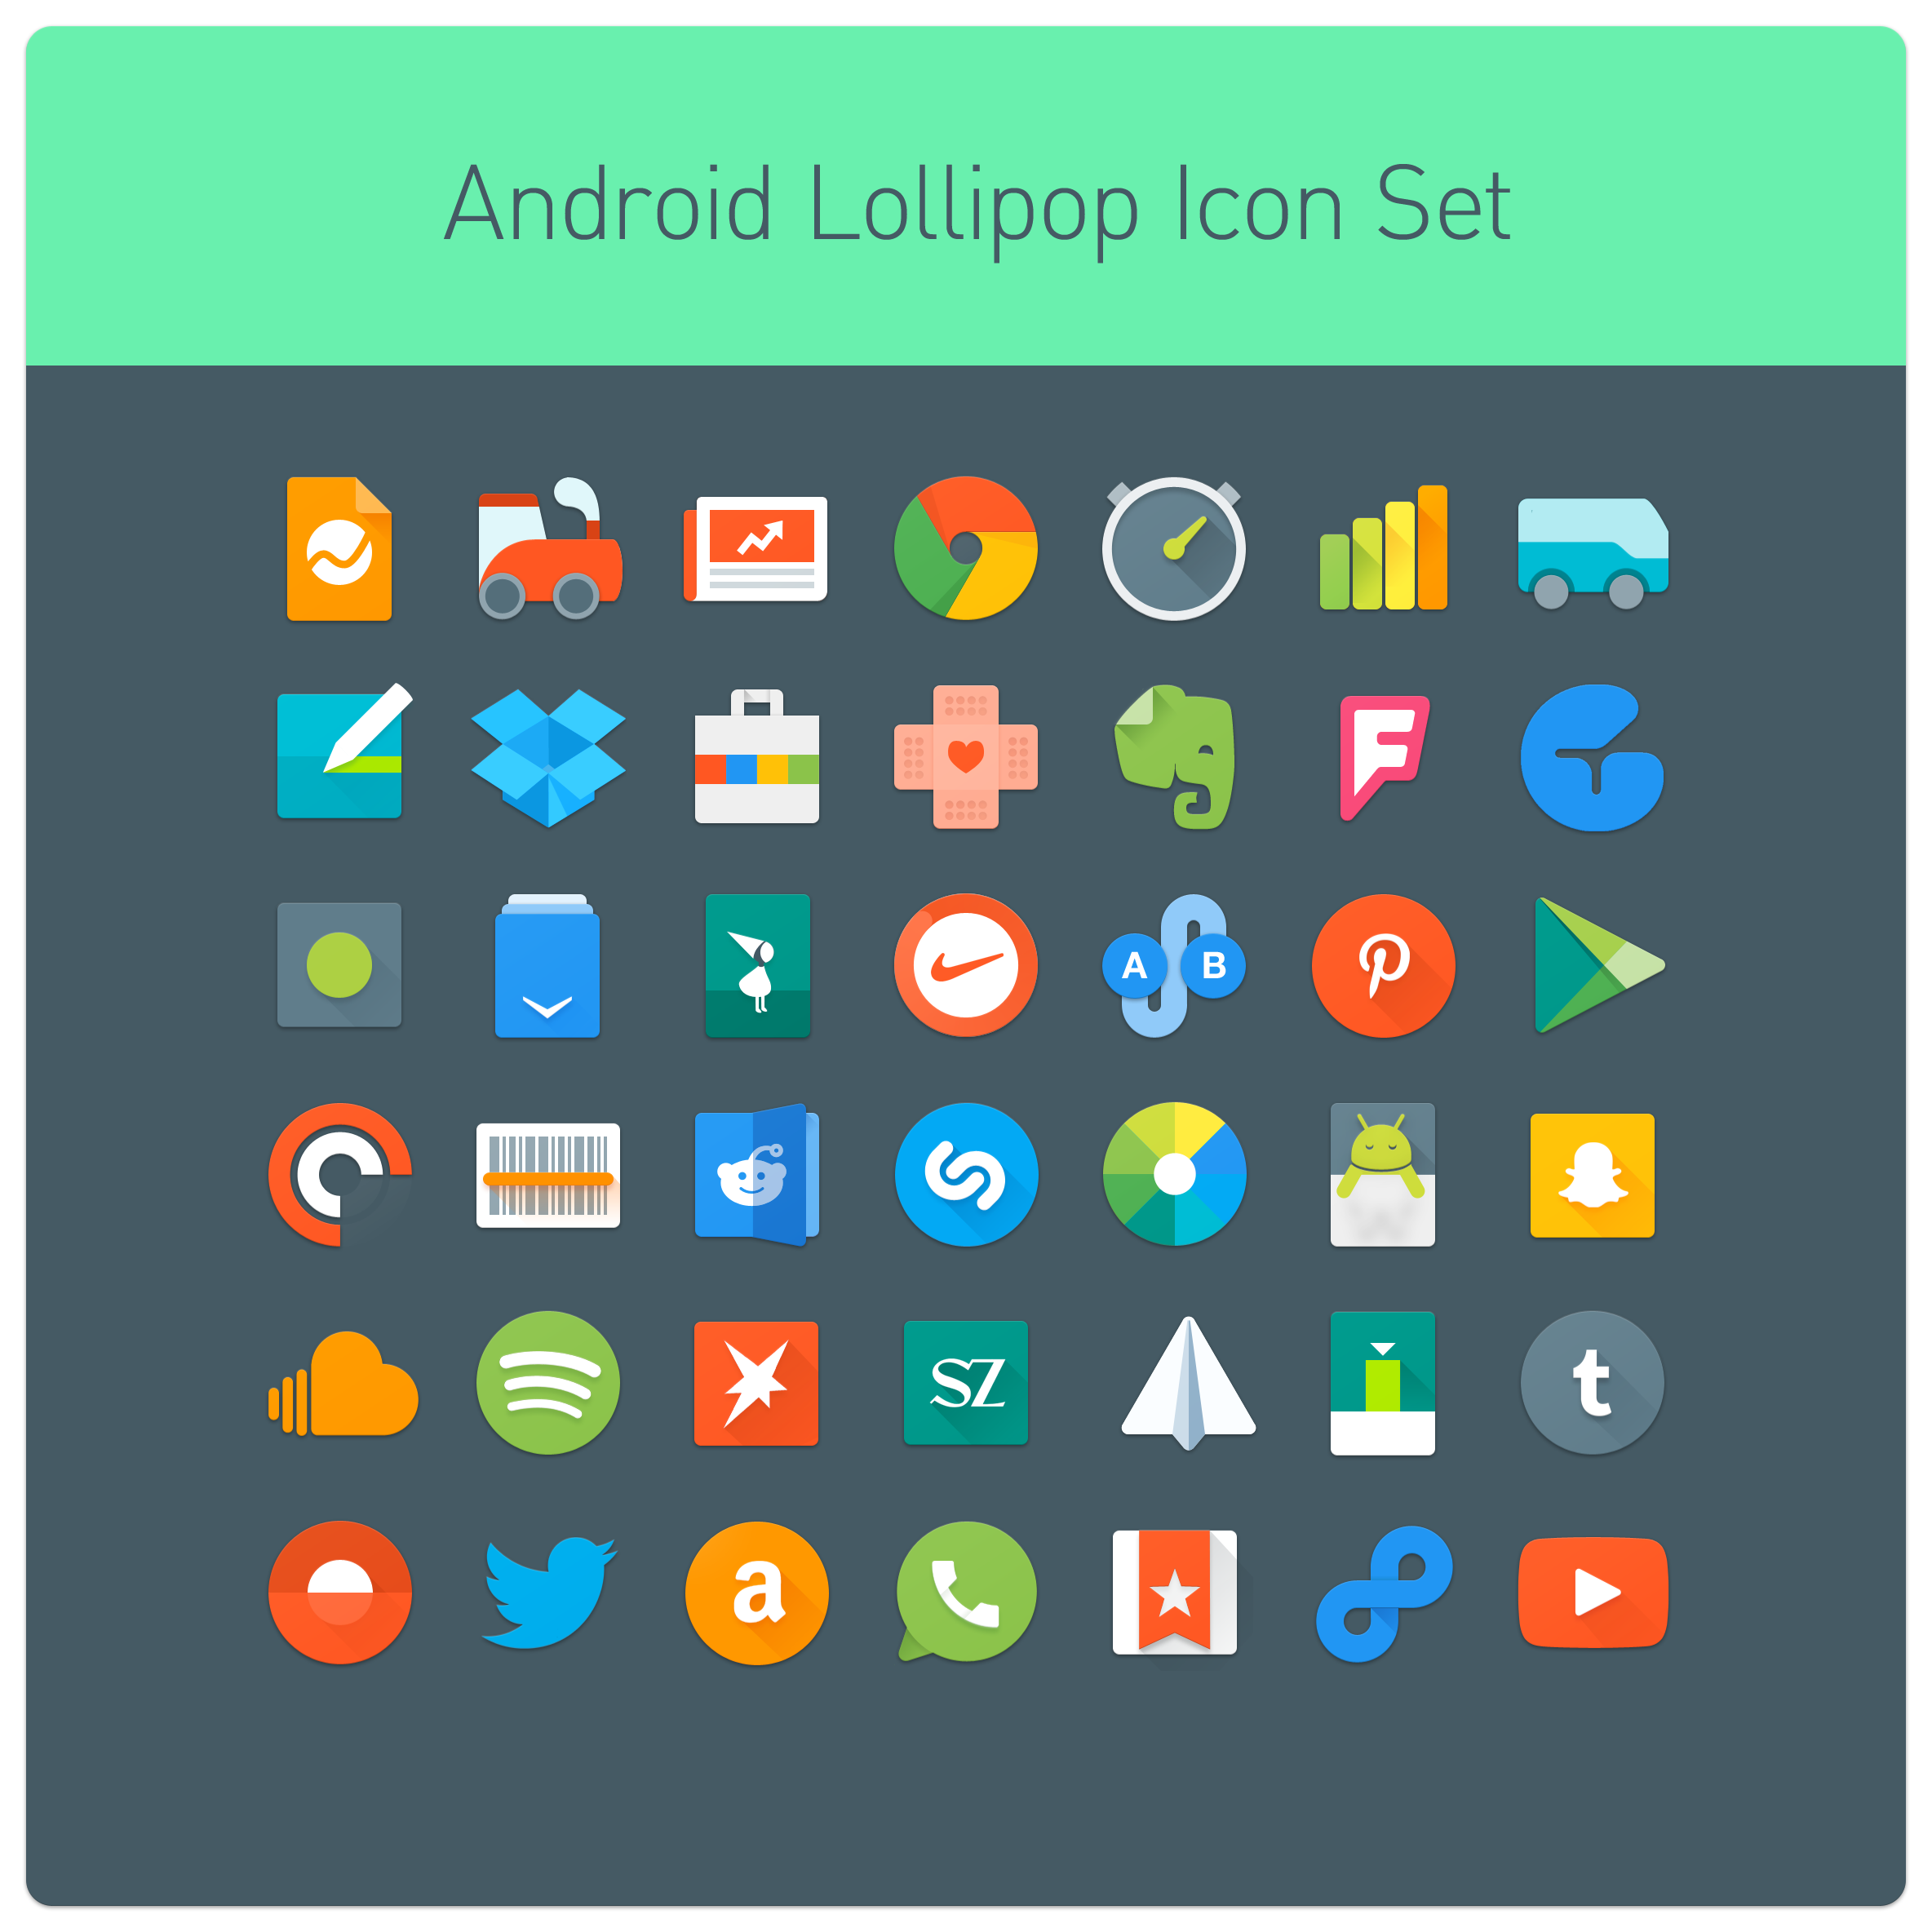 Android Lollipop Icon Set By Tinylab On Deviantart